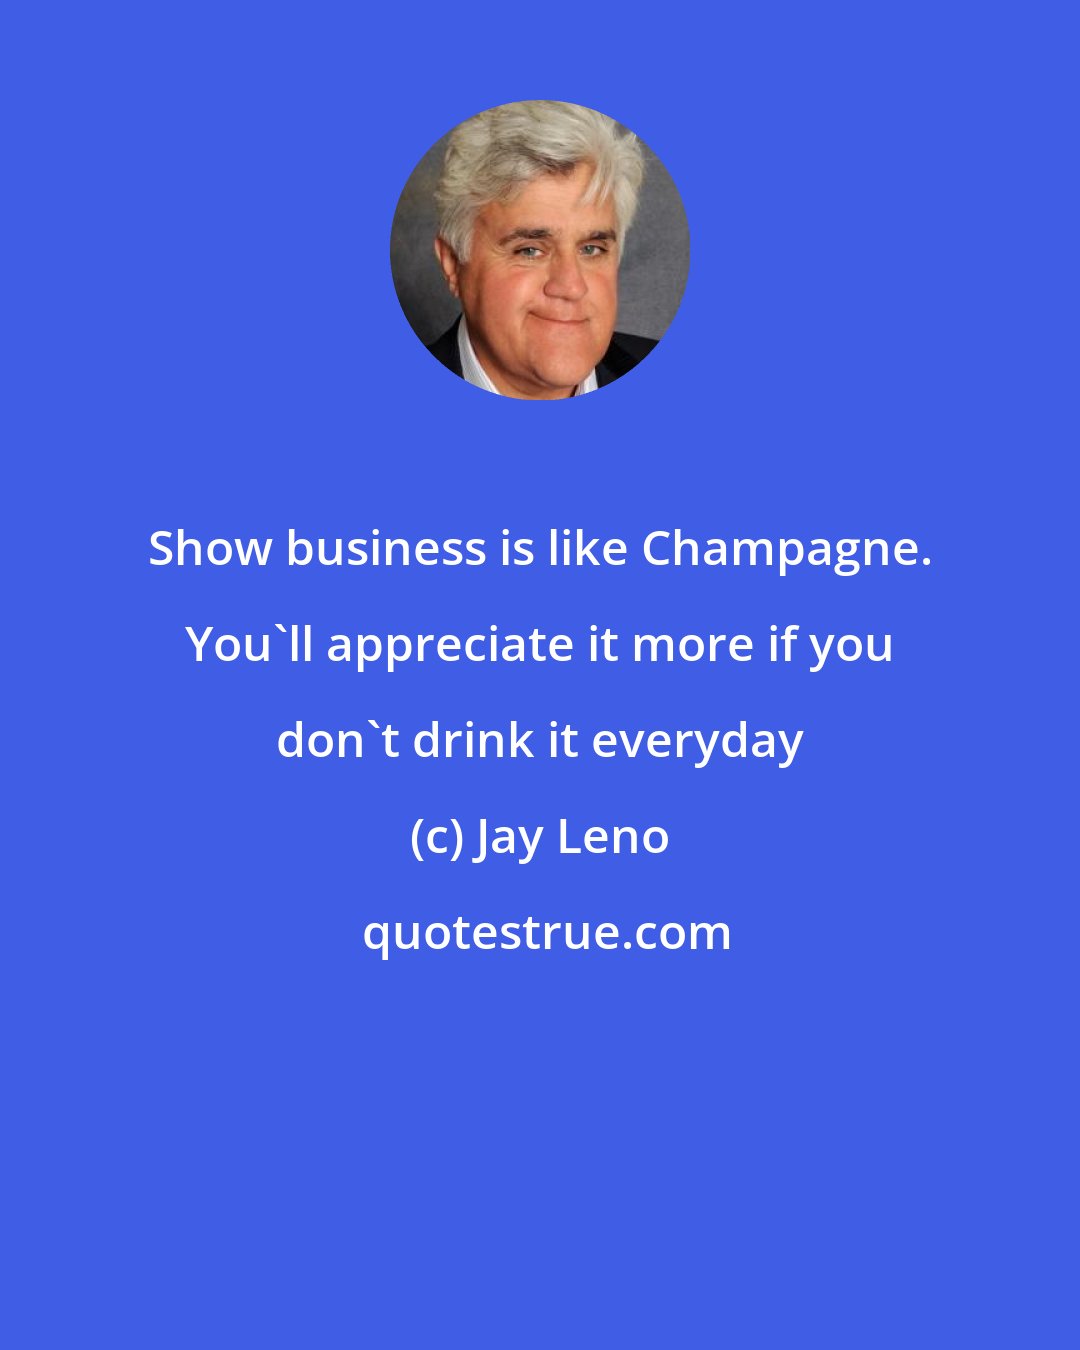 Jay Leno: Show business is like Champagne. You'll appreciate it more if you don't drink it everyday